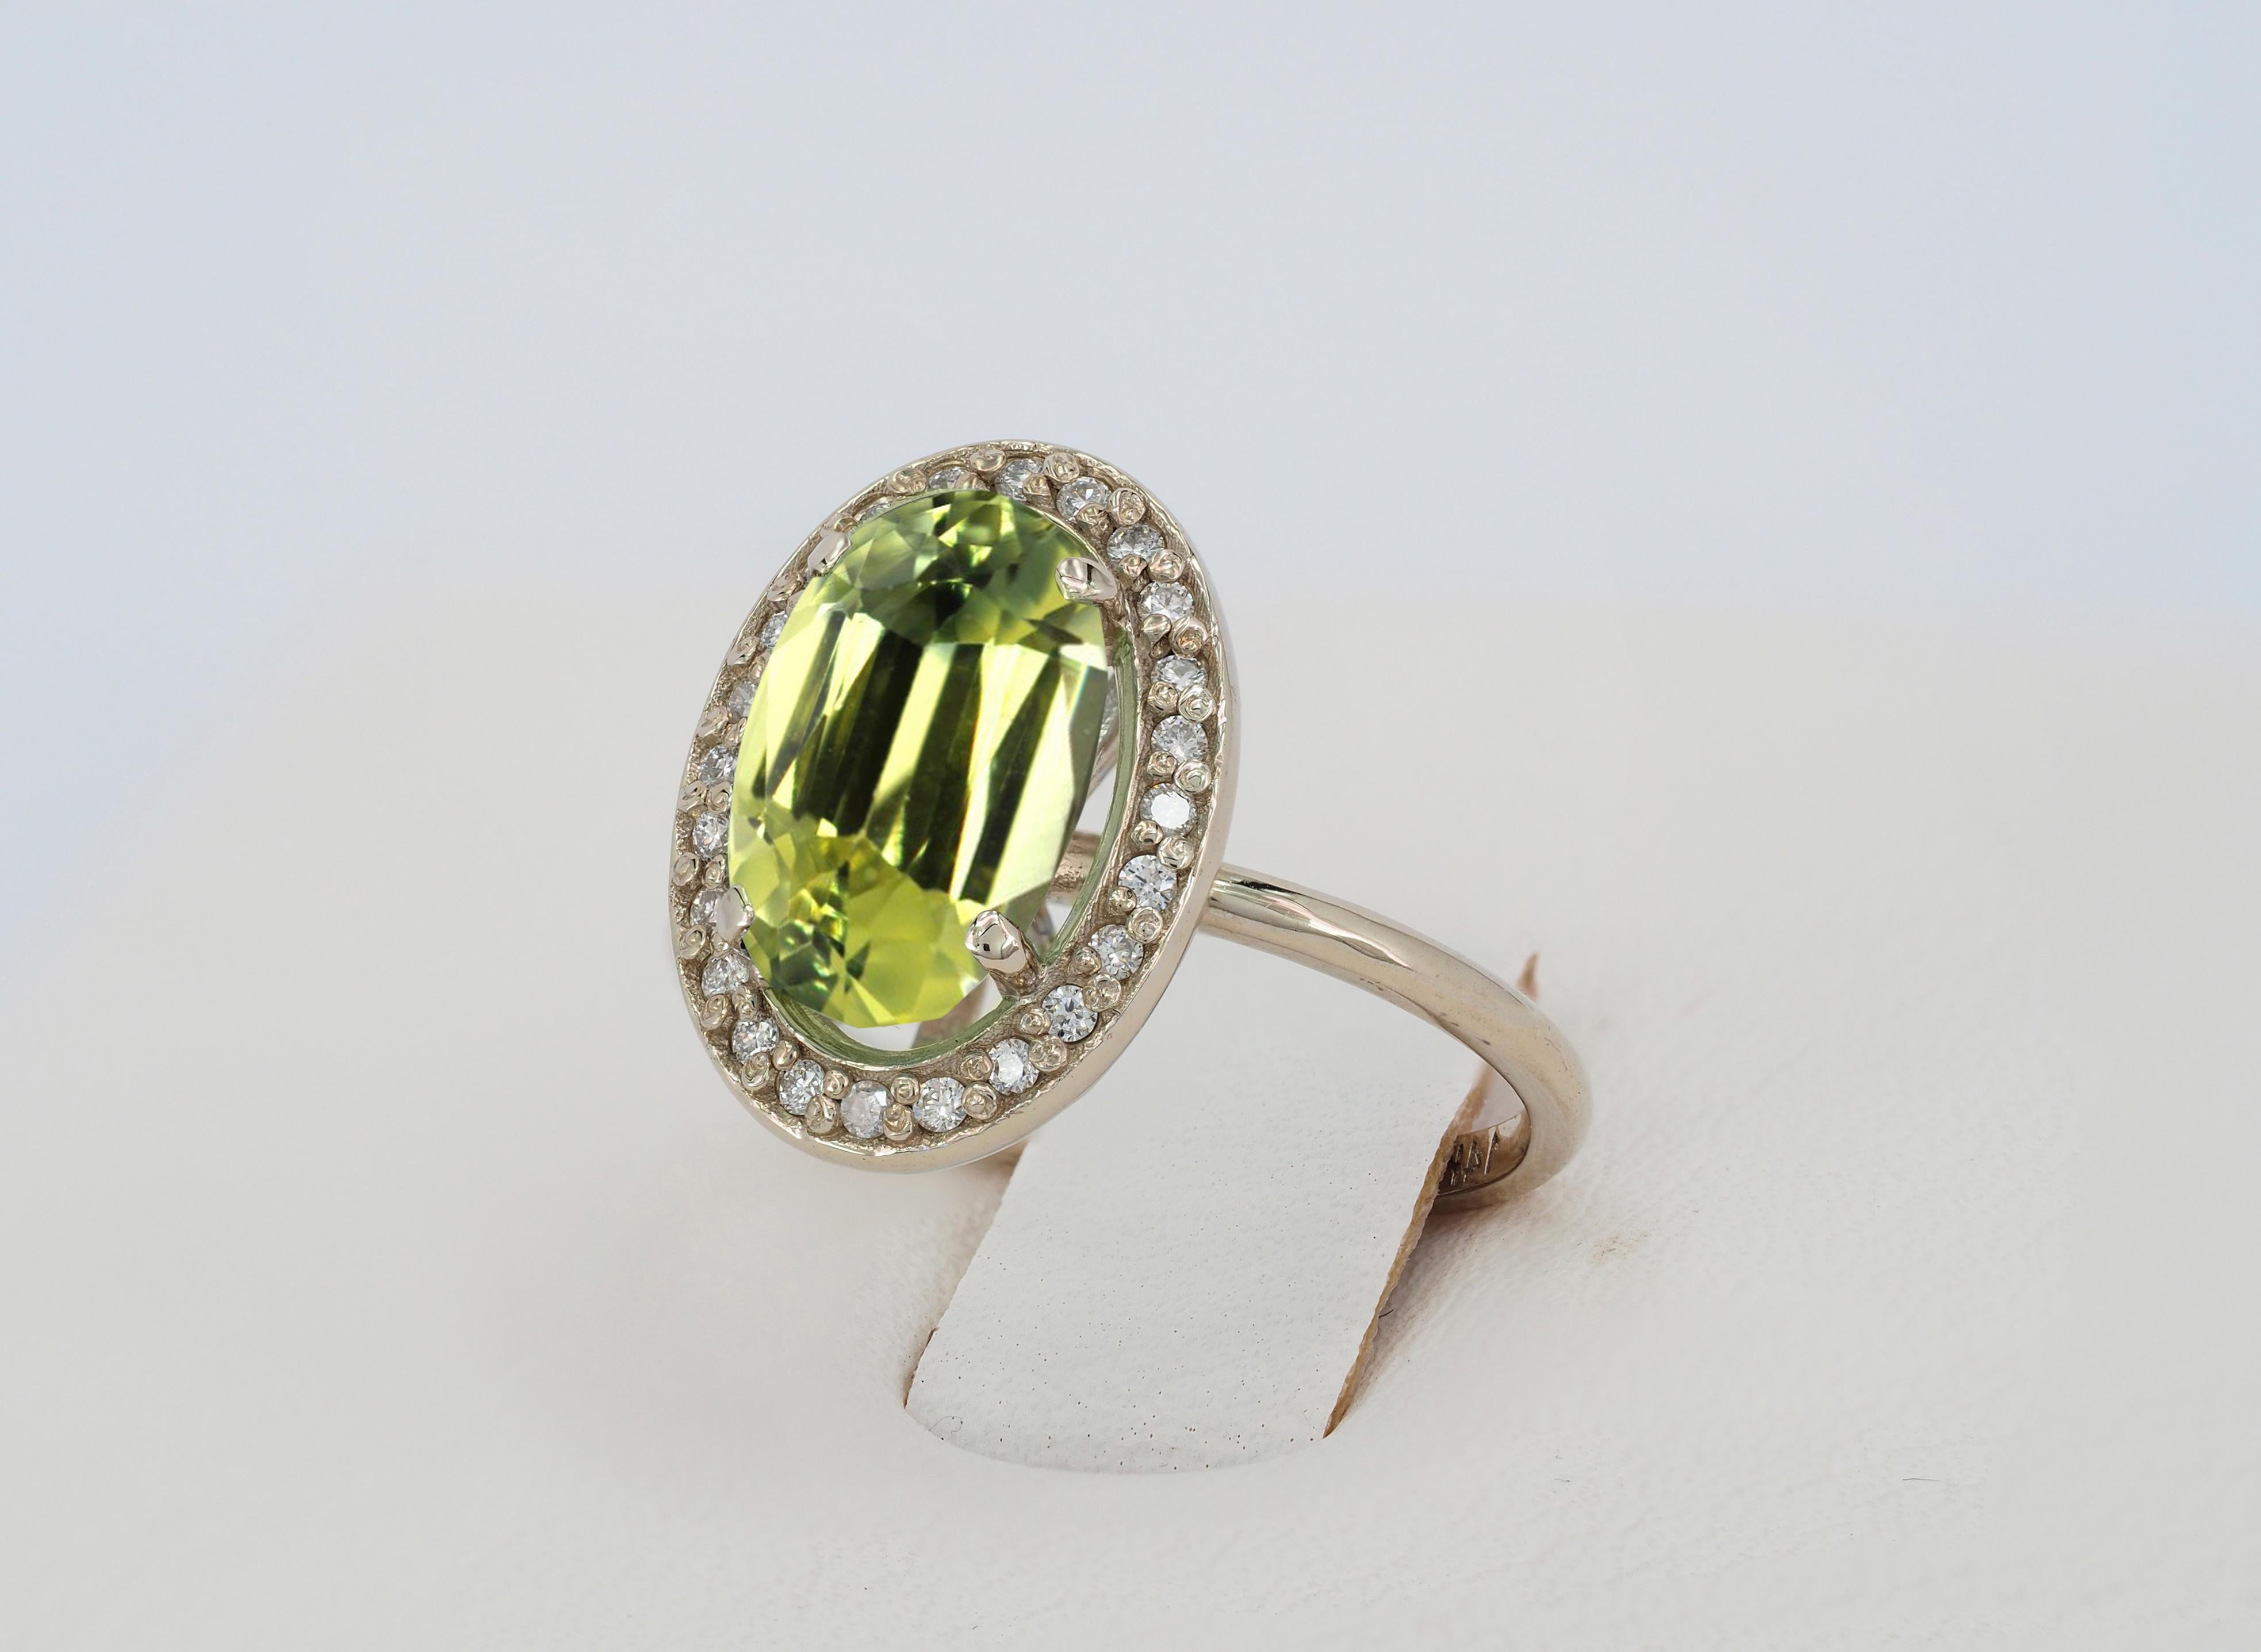 For Sale:  Peridot and diamonds 14k gold ring. 7